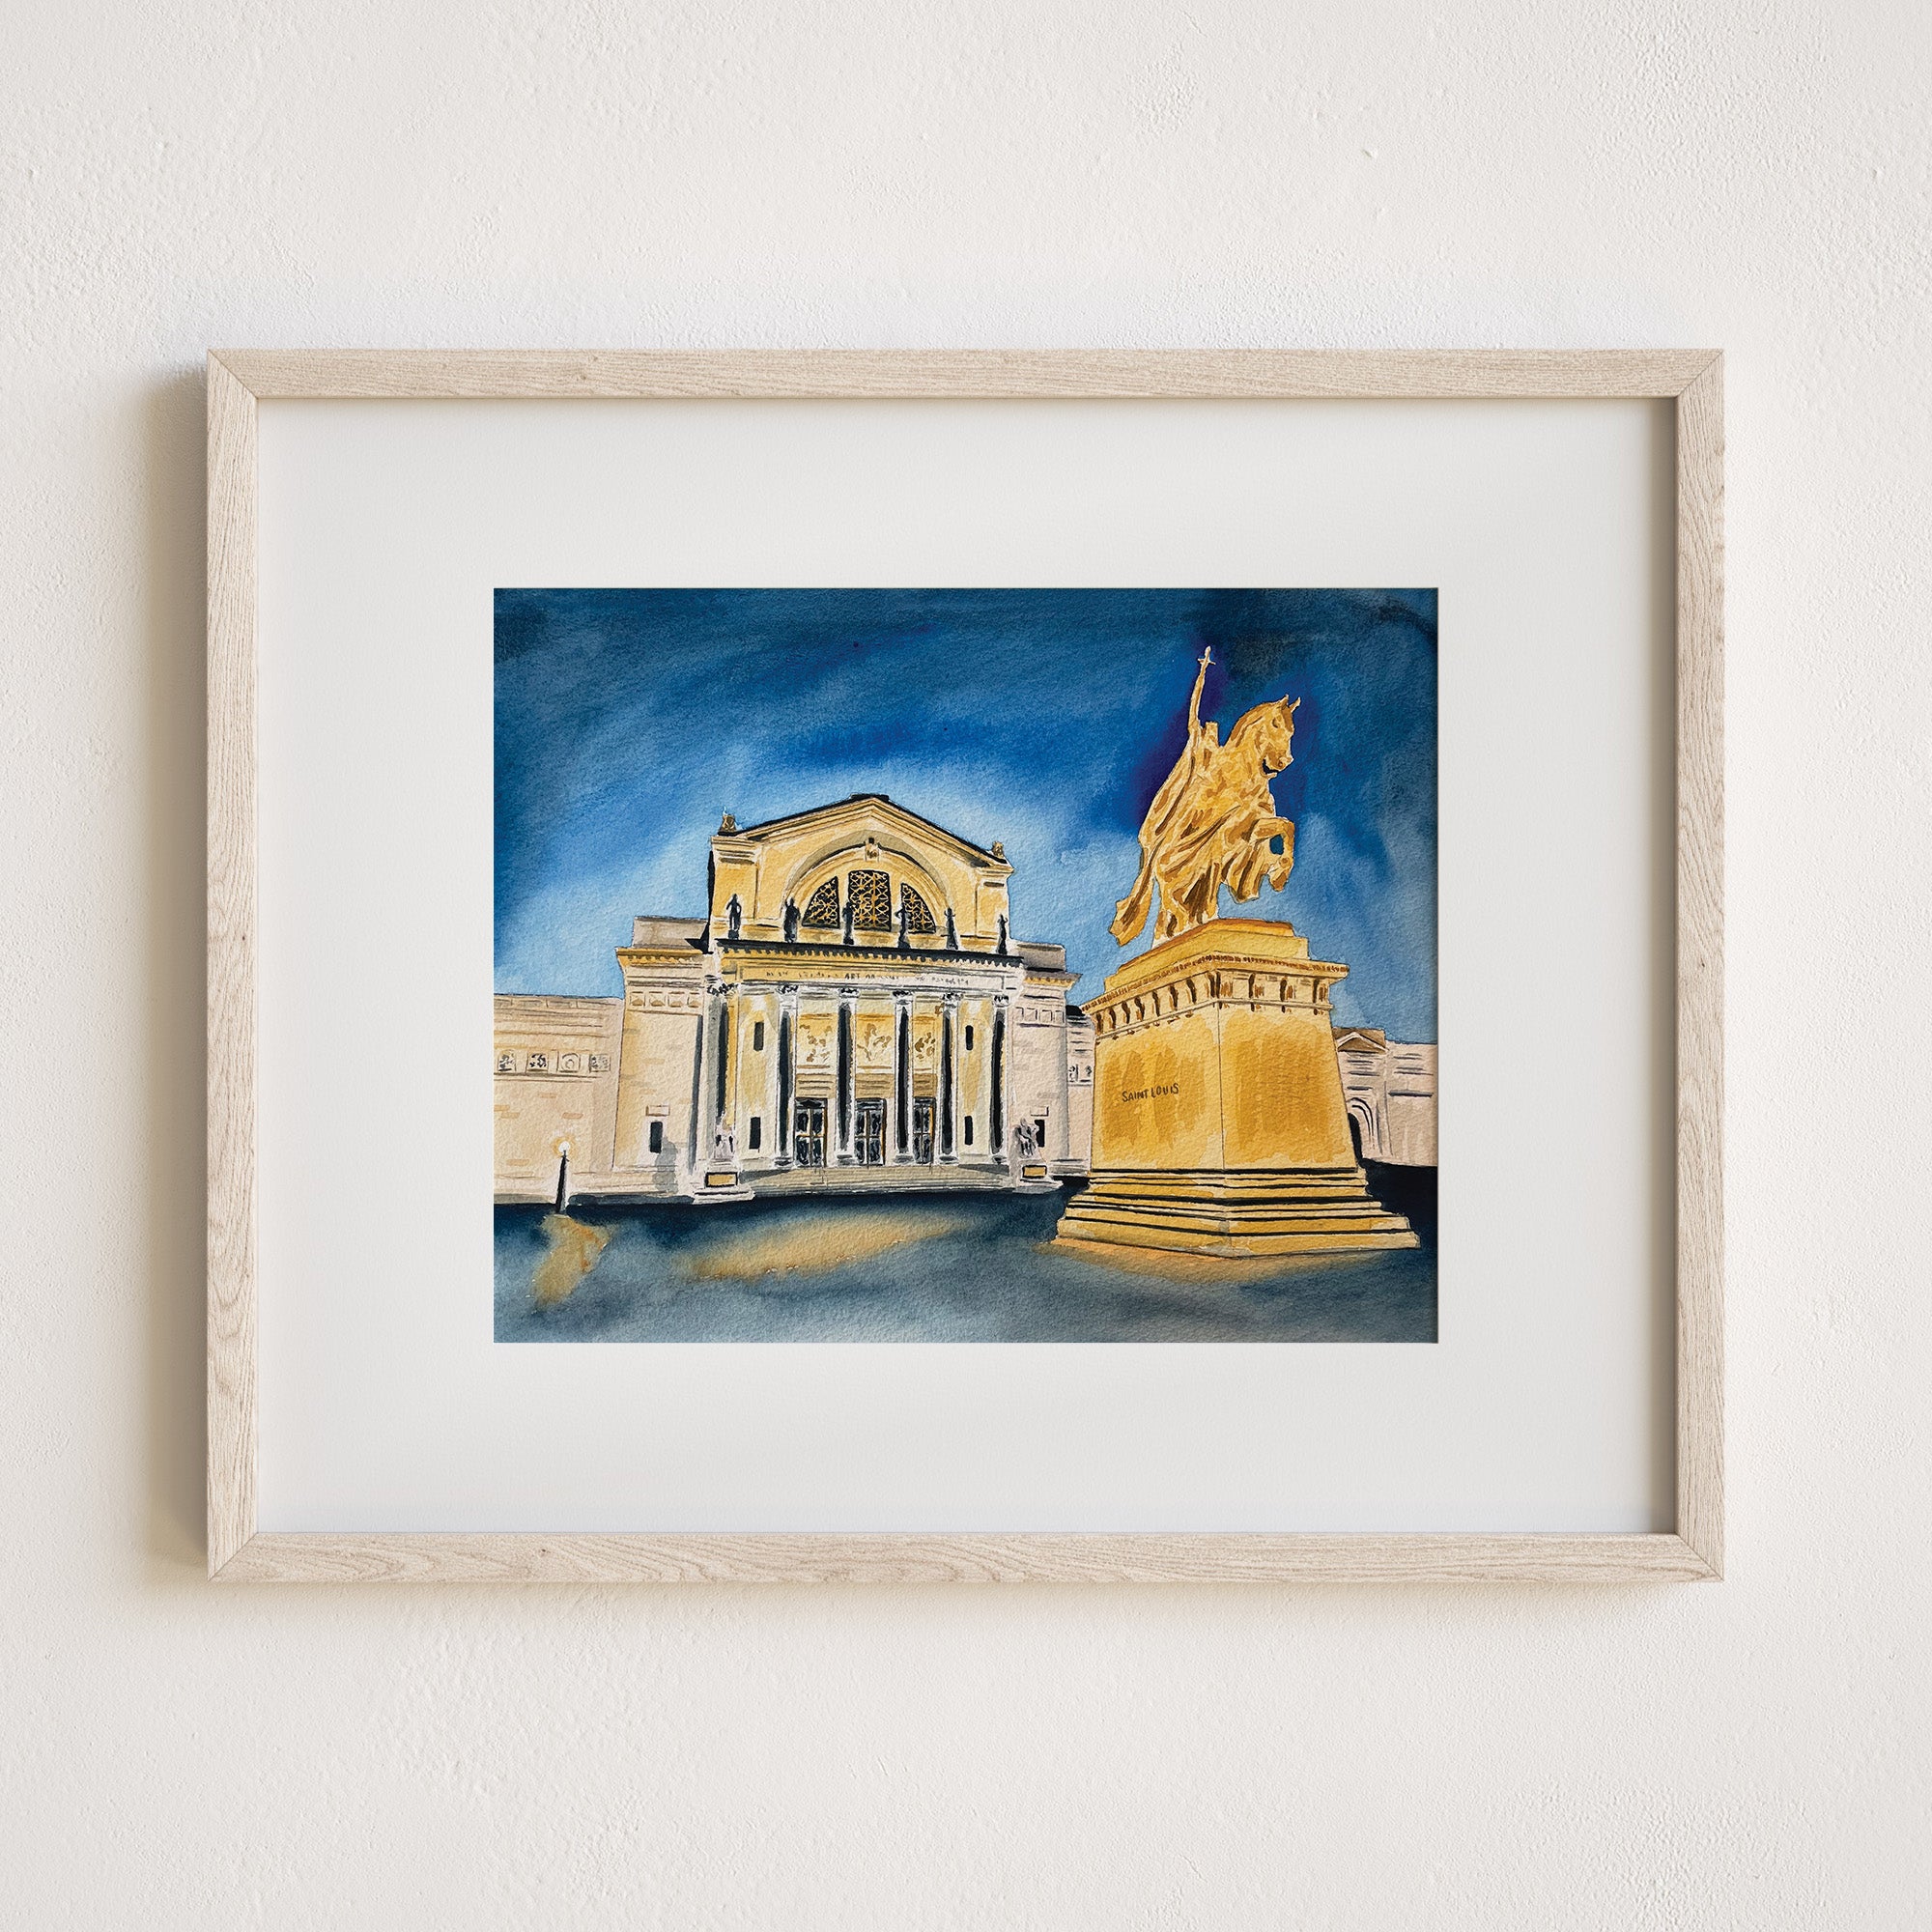 Print of a watercolor painting of the St. Louis art museum